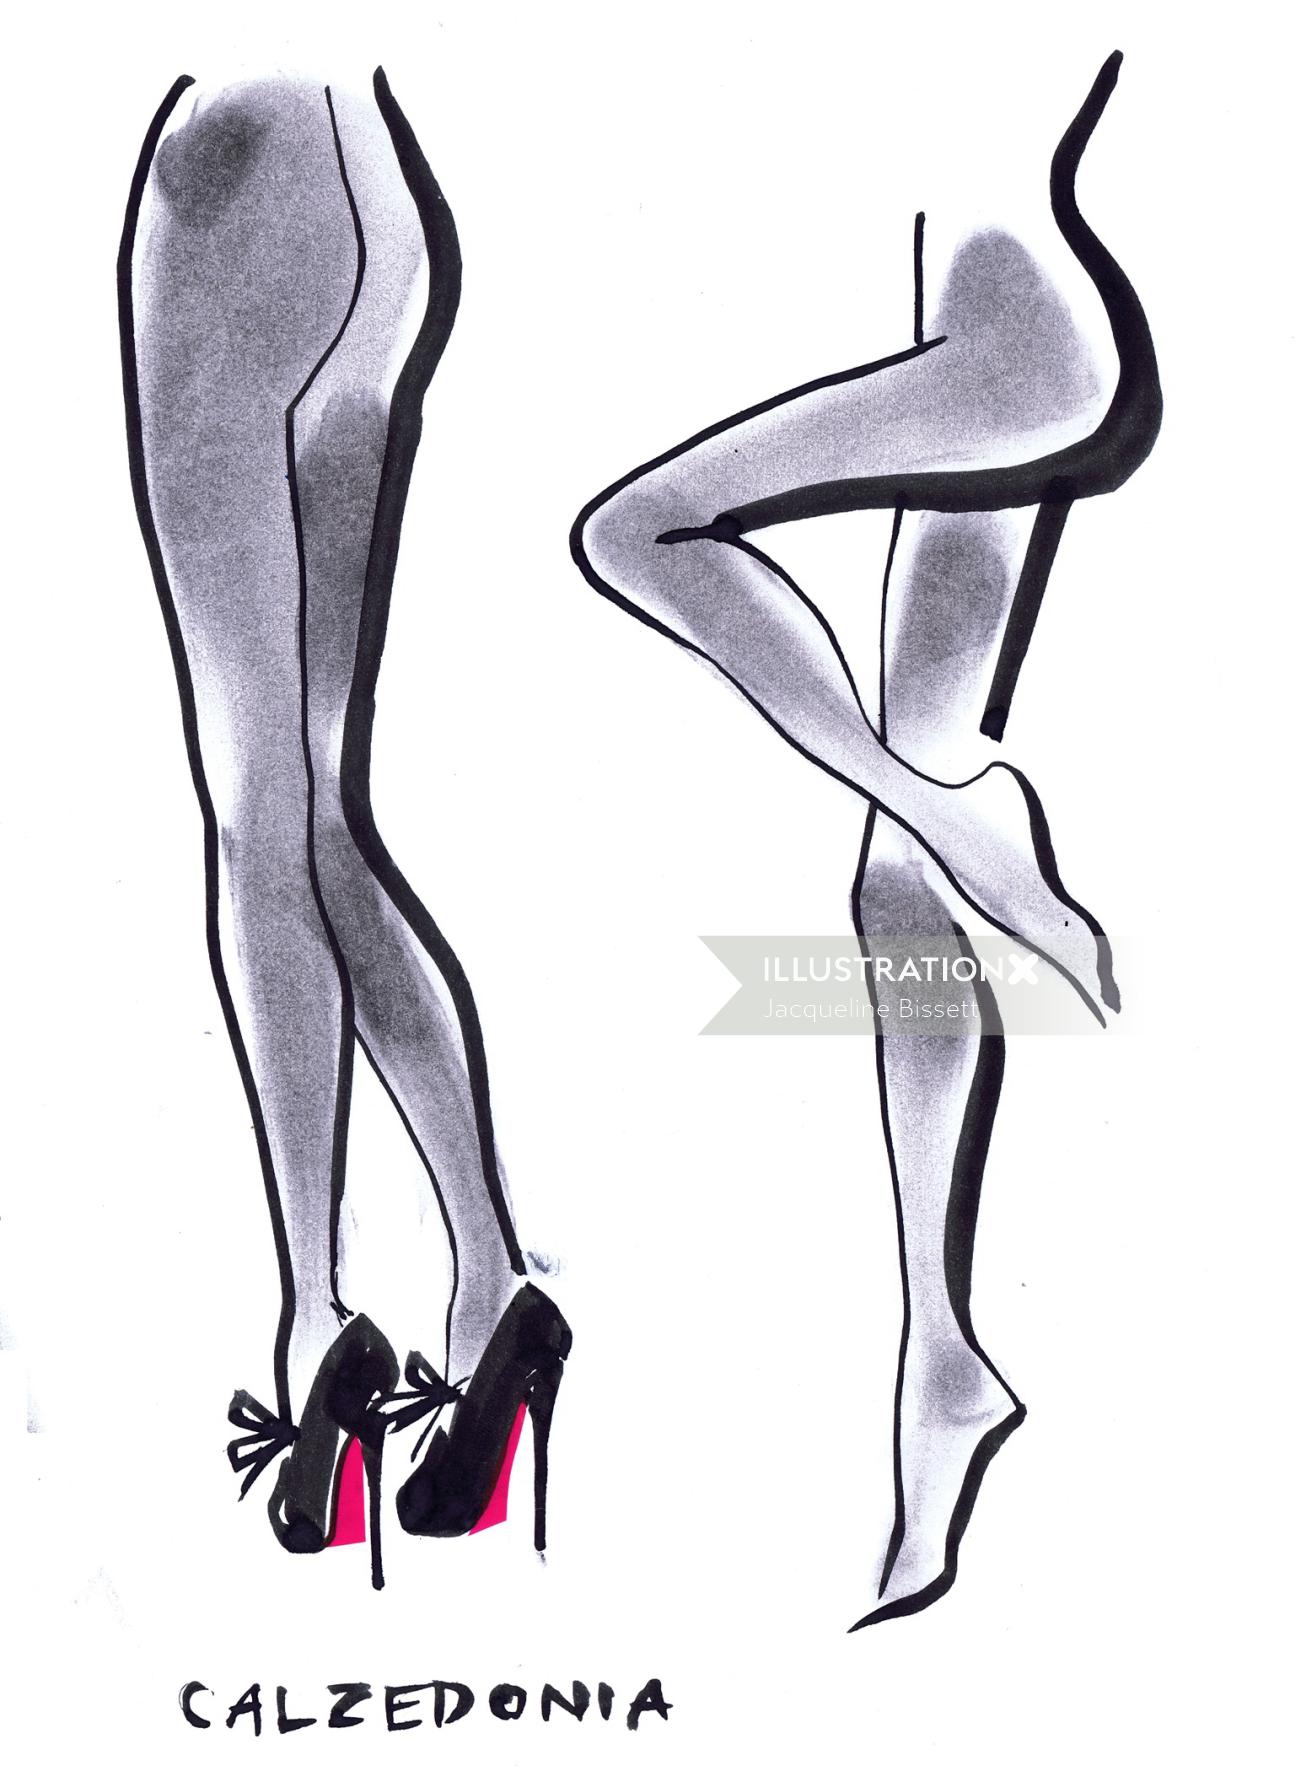  Italian Tights Sketch by Jacqueline Bissett